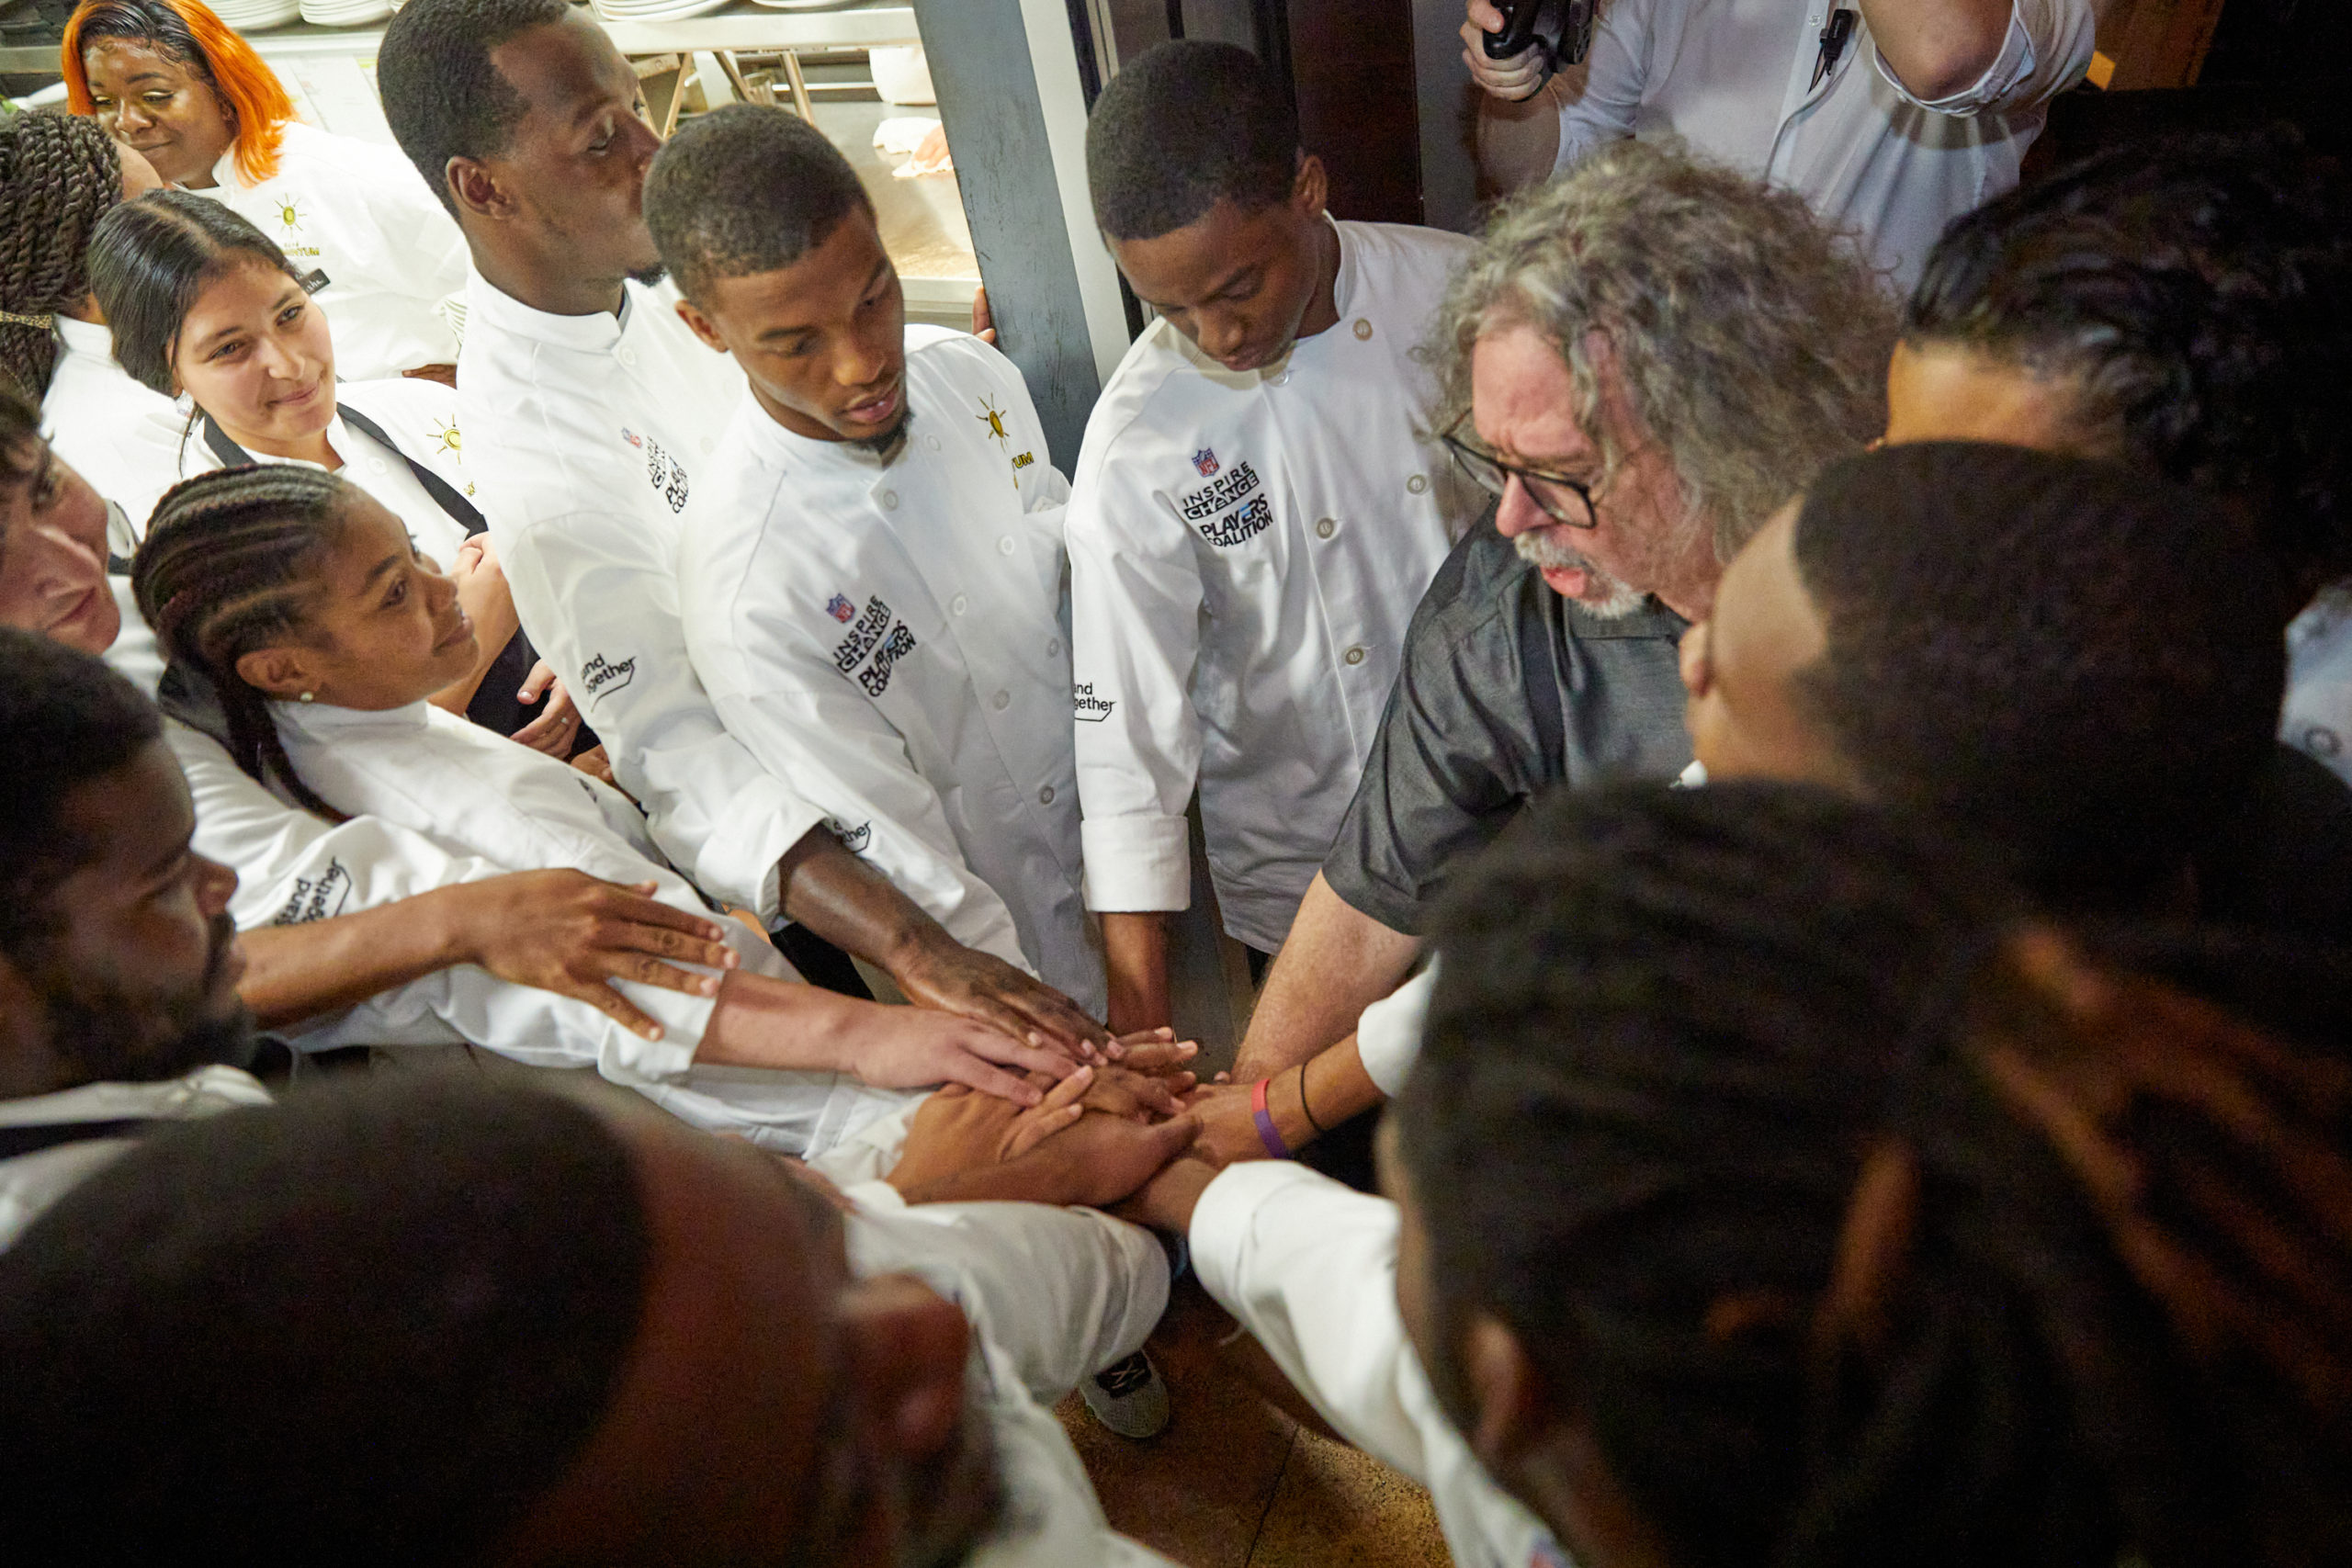 Cafe Momentum interns put their hands together in a huddle